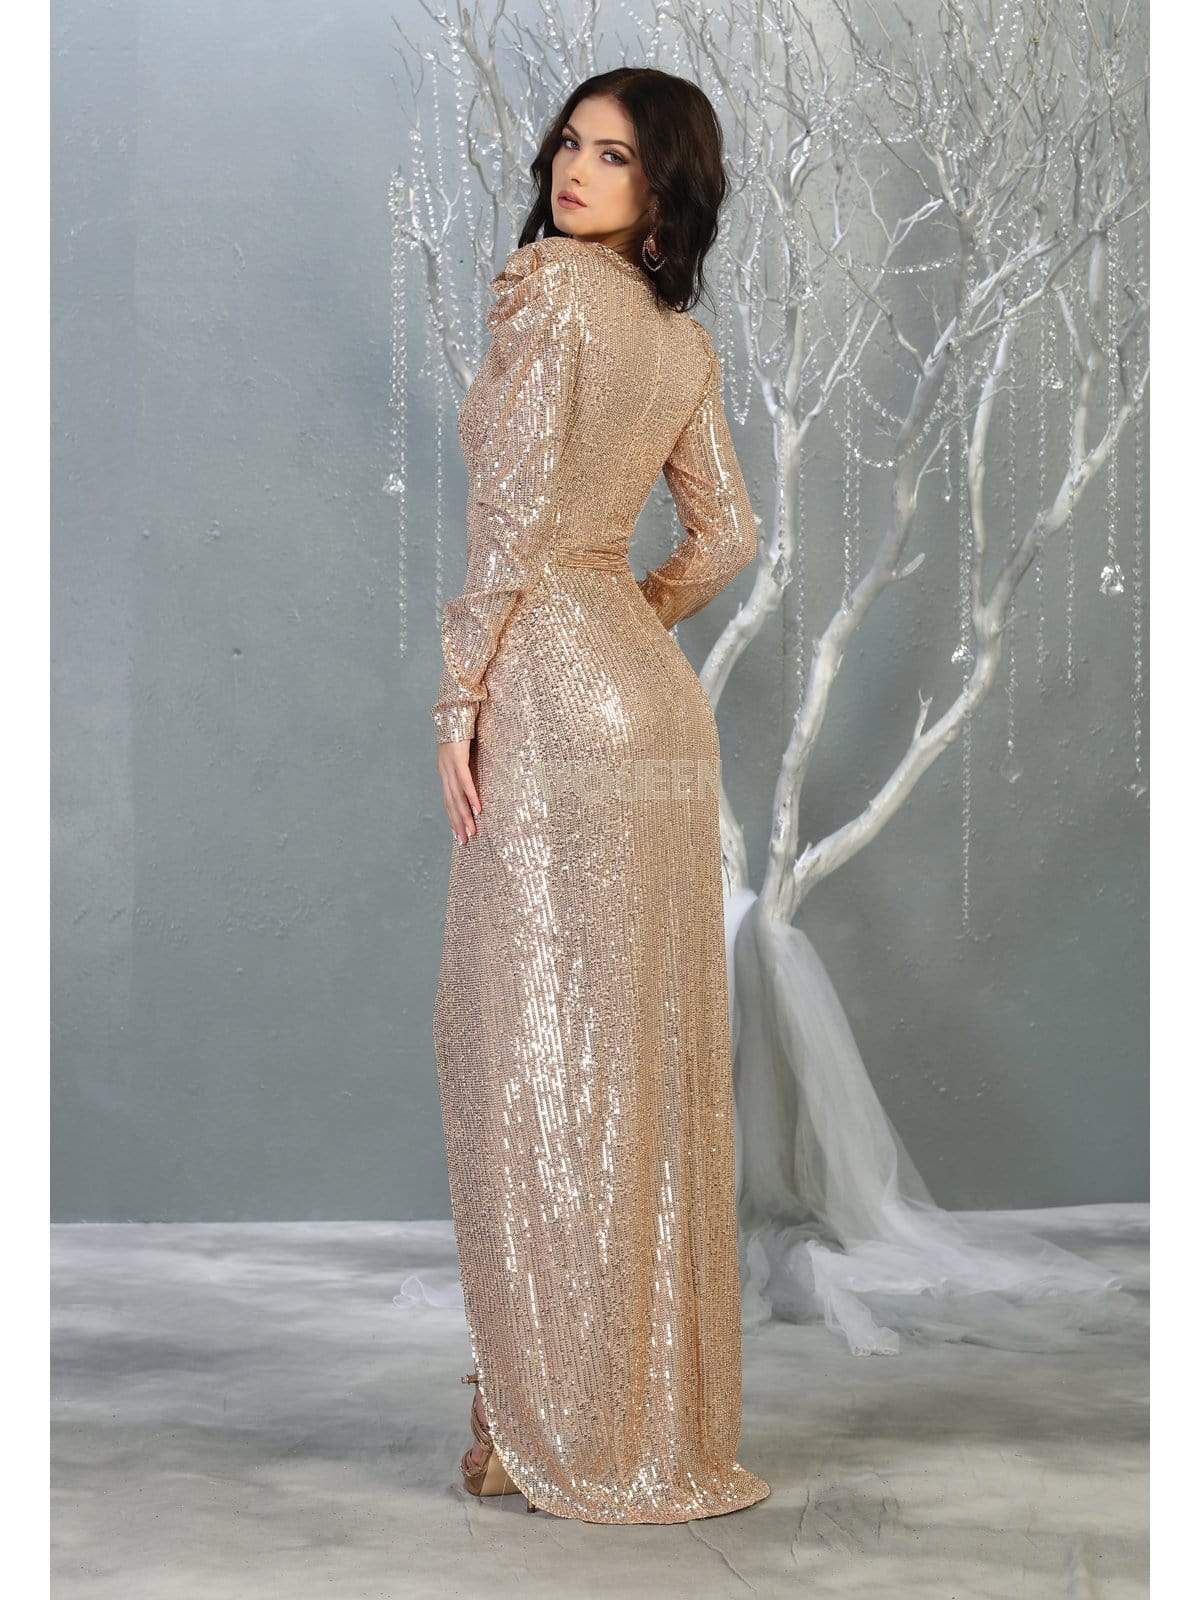 May Queen - MQ1821 Sequin Embellished Gown with Slit Evening Dresses